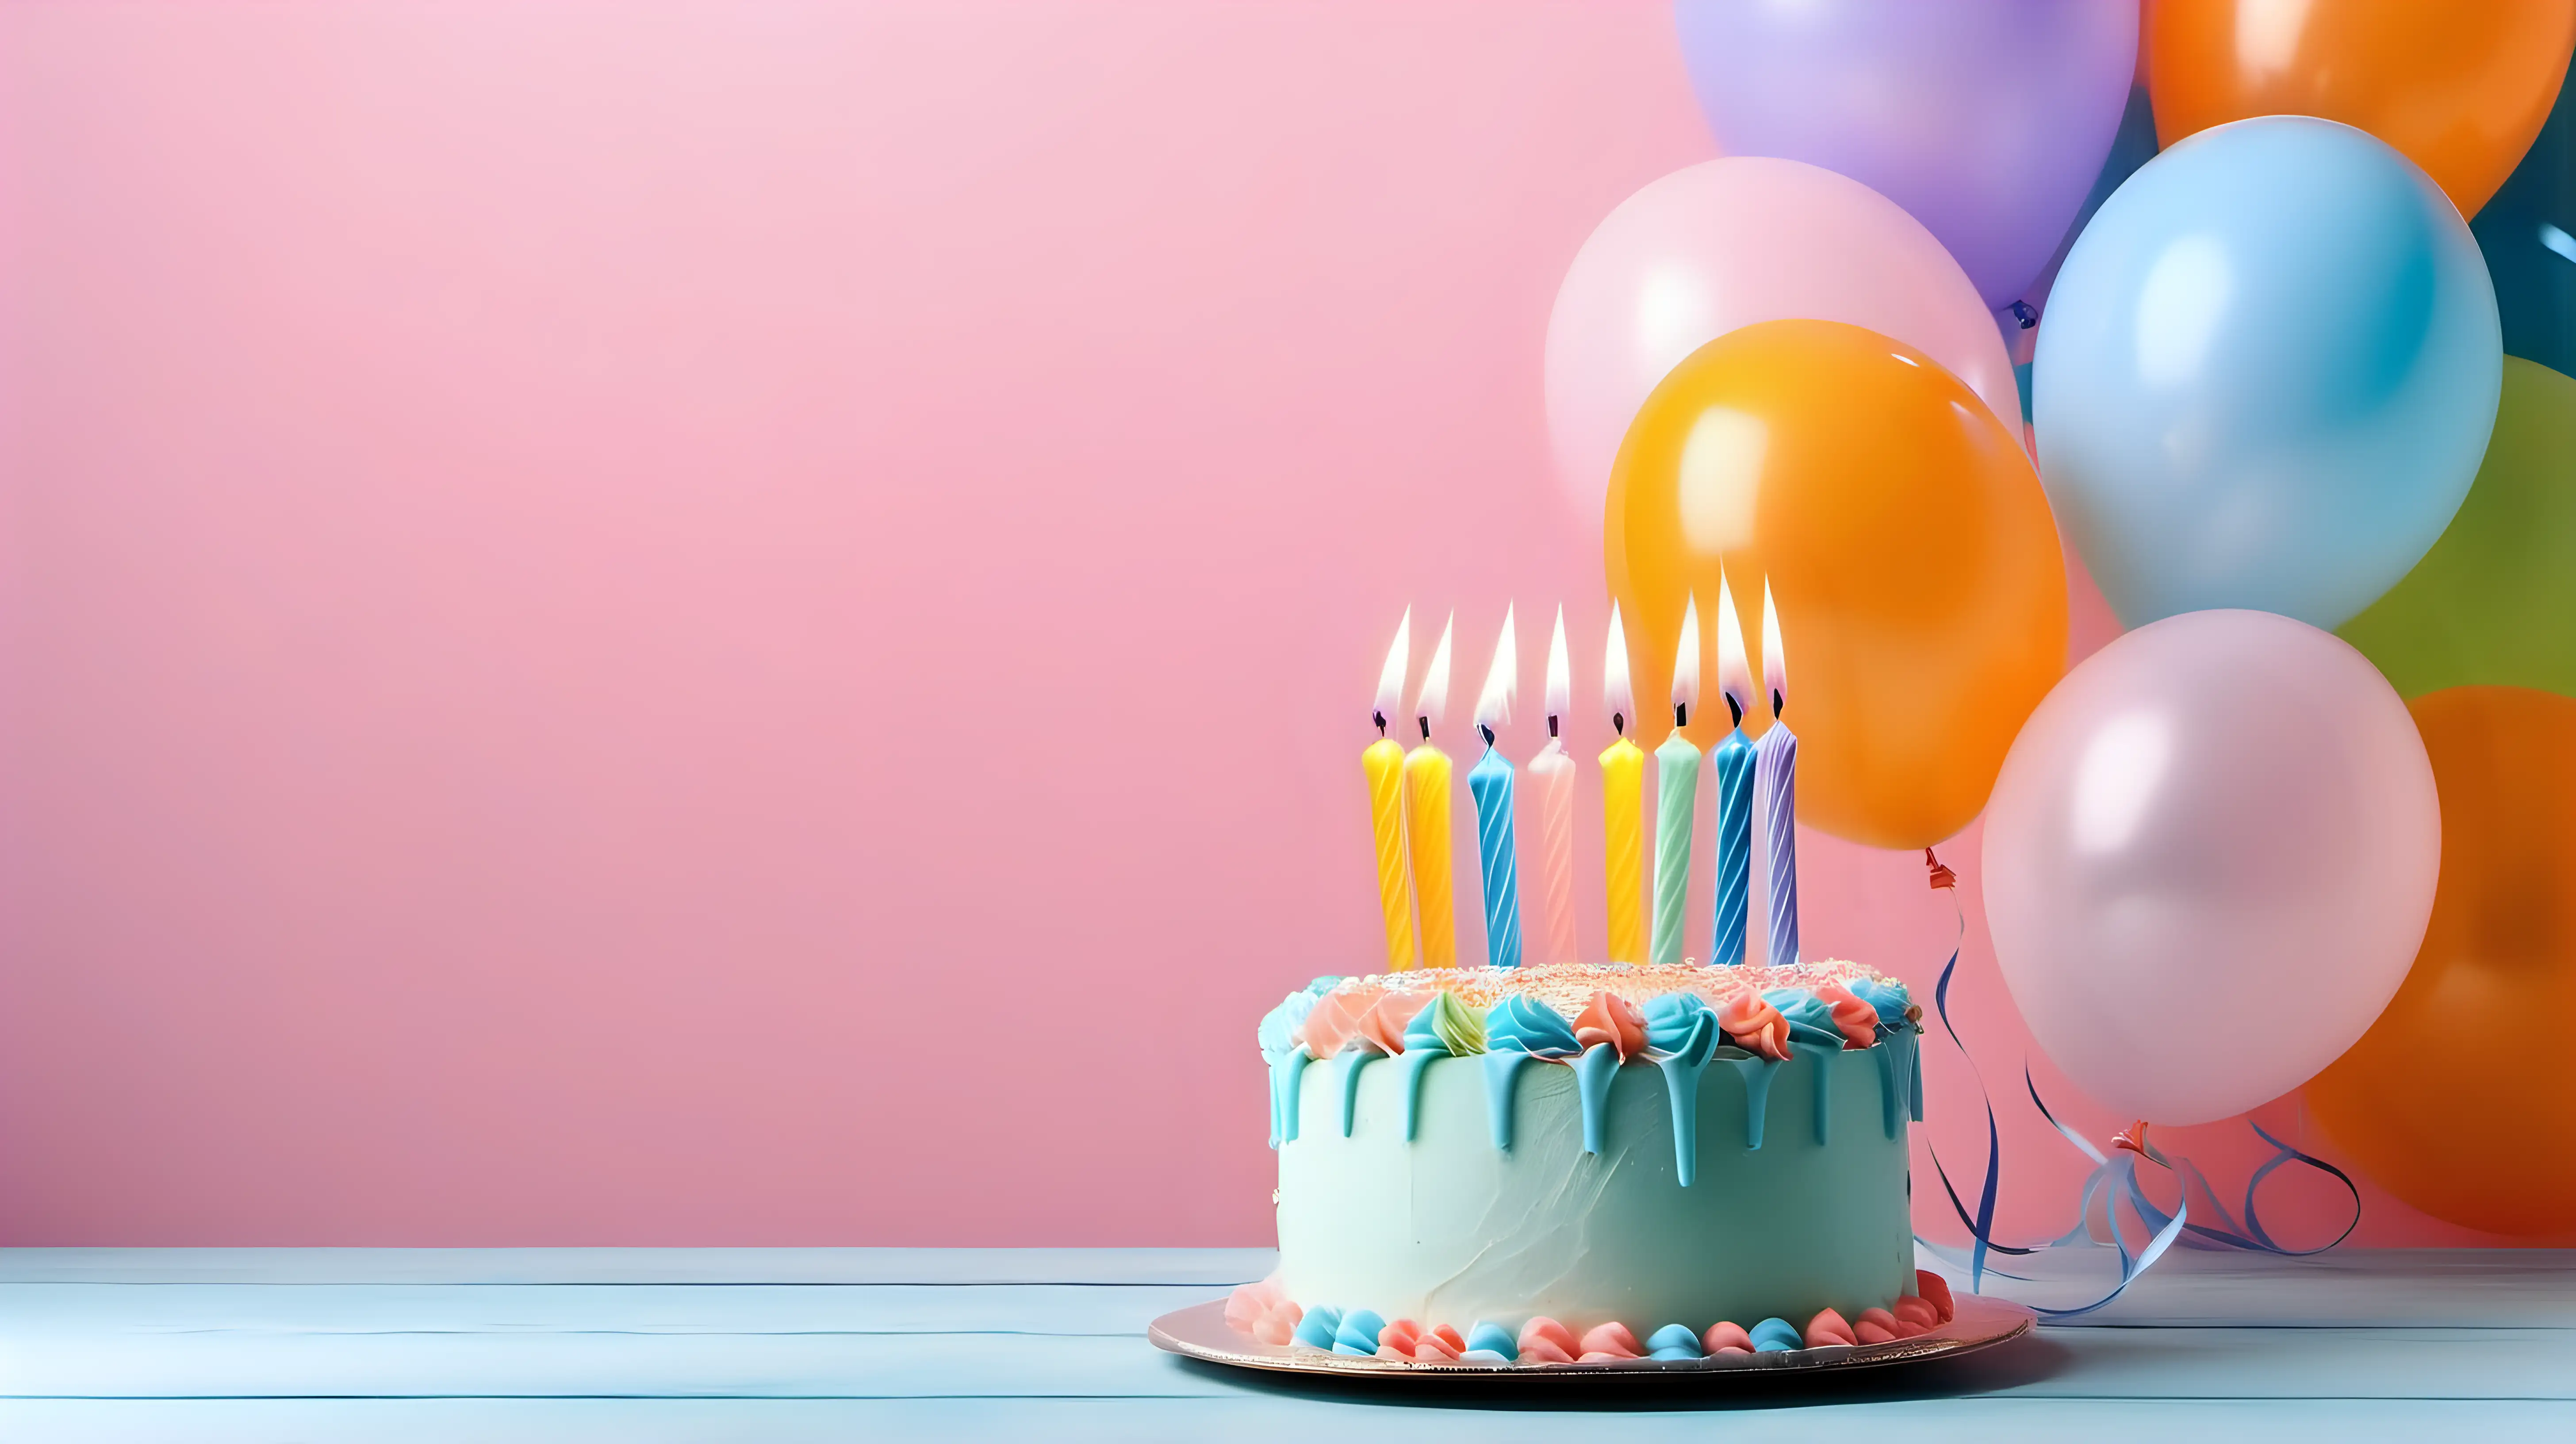 birthday cake with 1 candles, colorful pastel balloons background, copy space